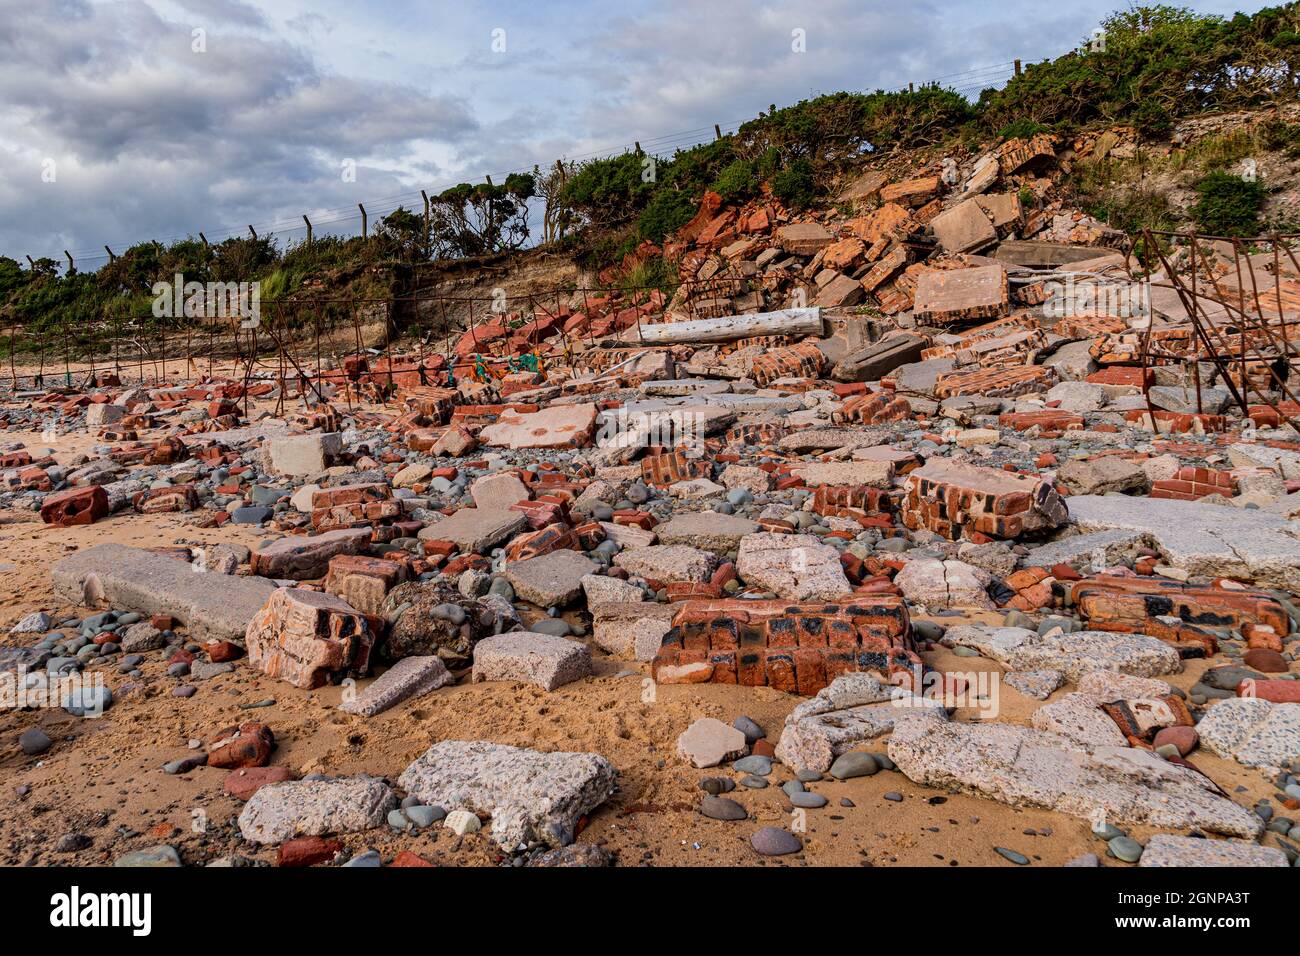 Signs of Coastal Erosion on a Beach at Powfoot Dumfries and Galloway in Scotland Stock Photo